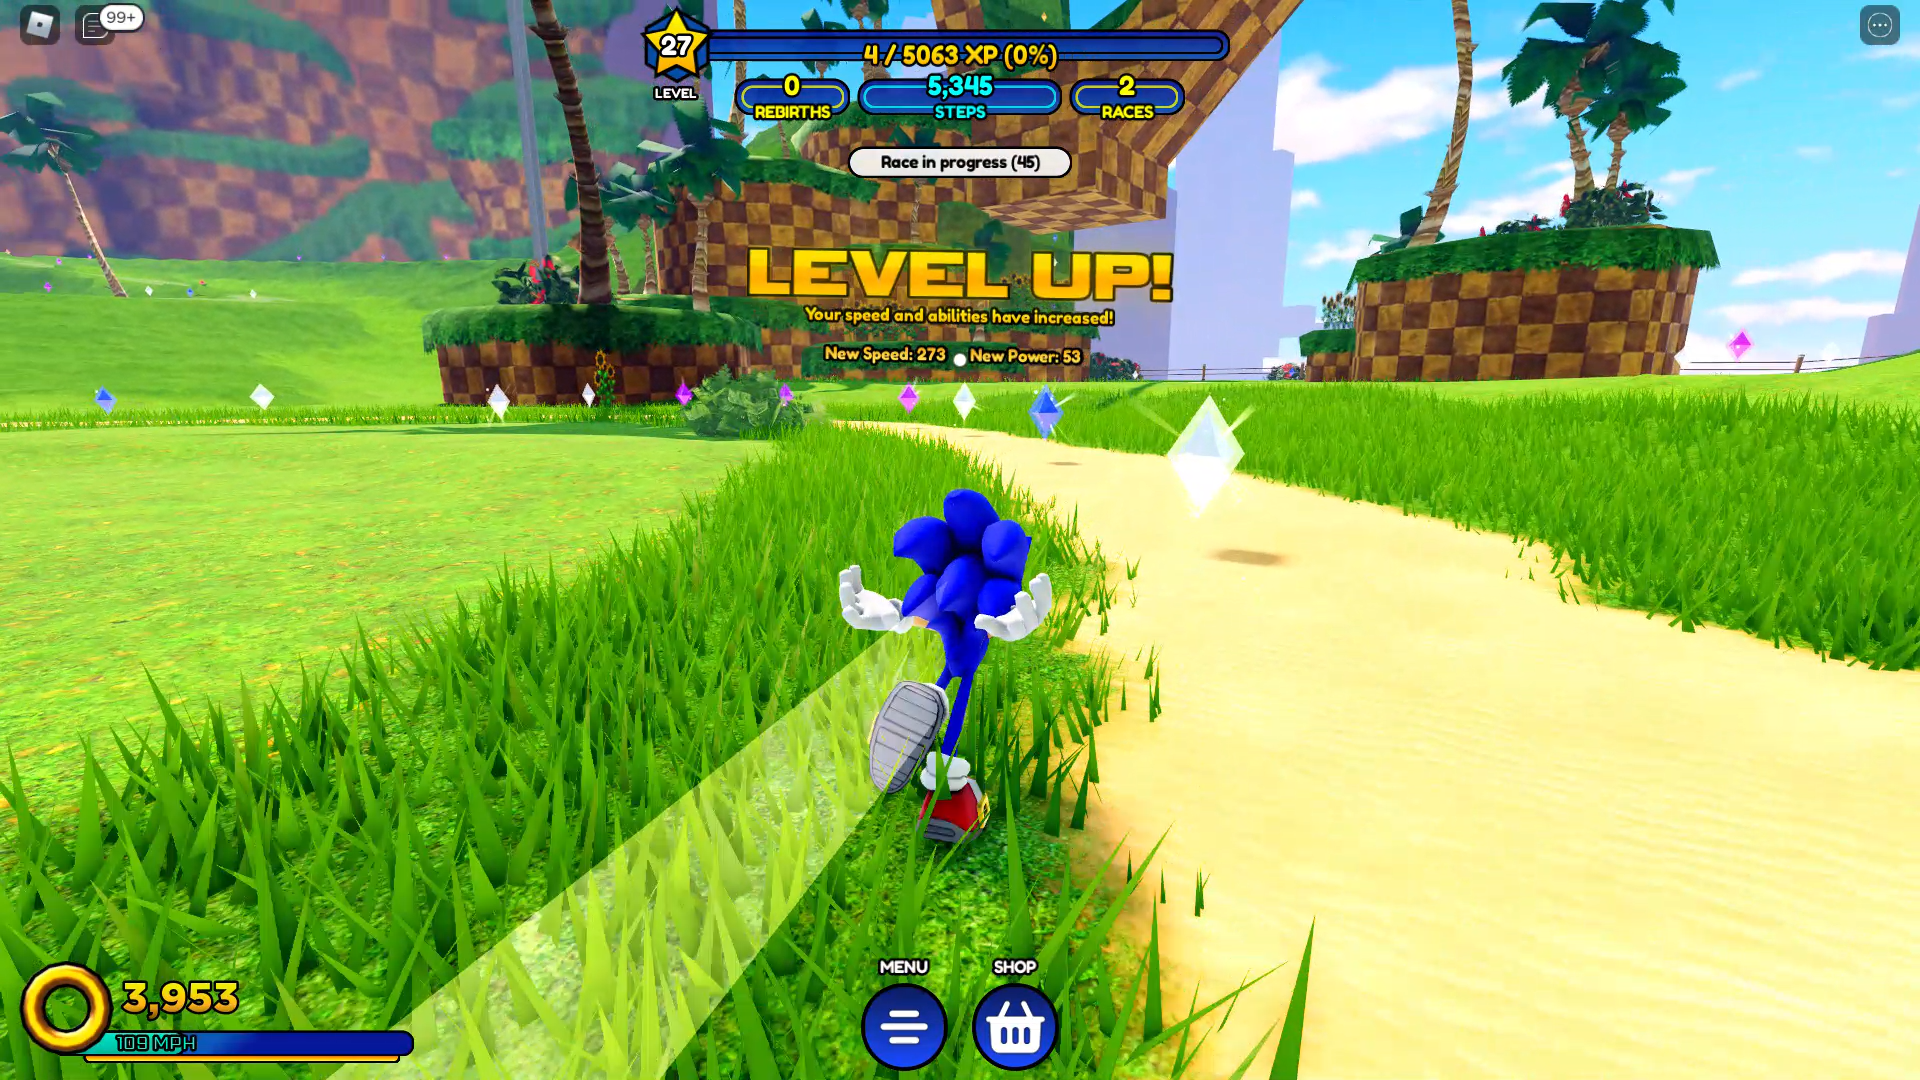 Sonic Speed Simulator review - Sonic running while the "Level Up!" notification appears overhead.